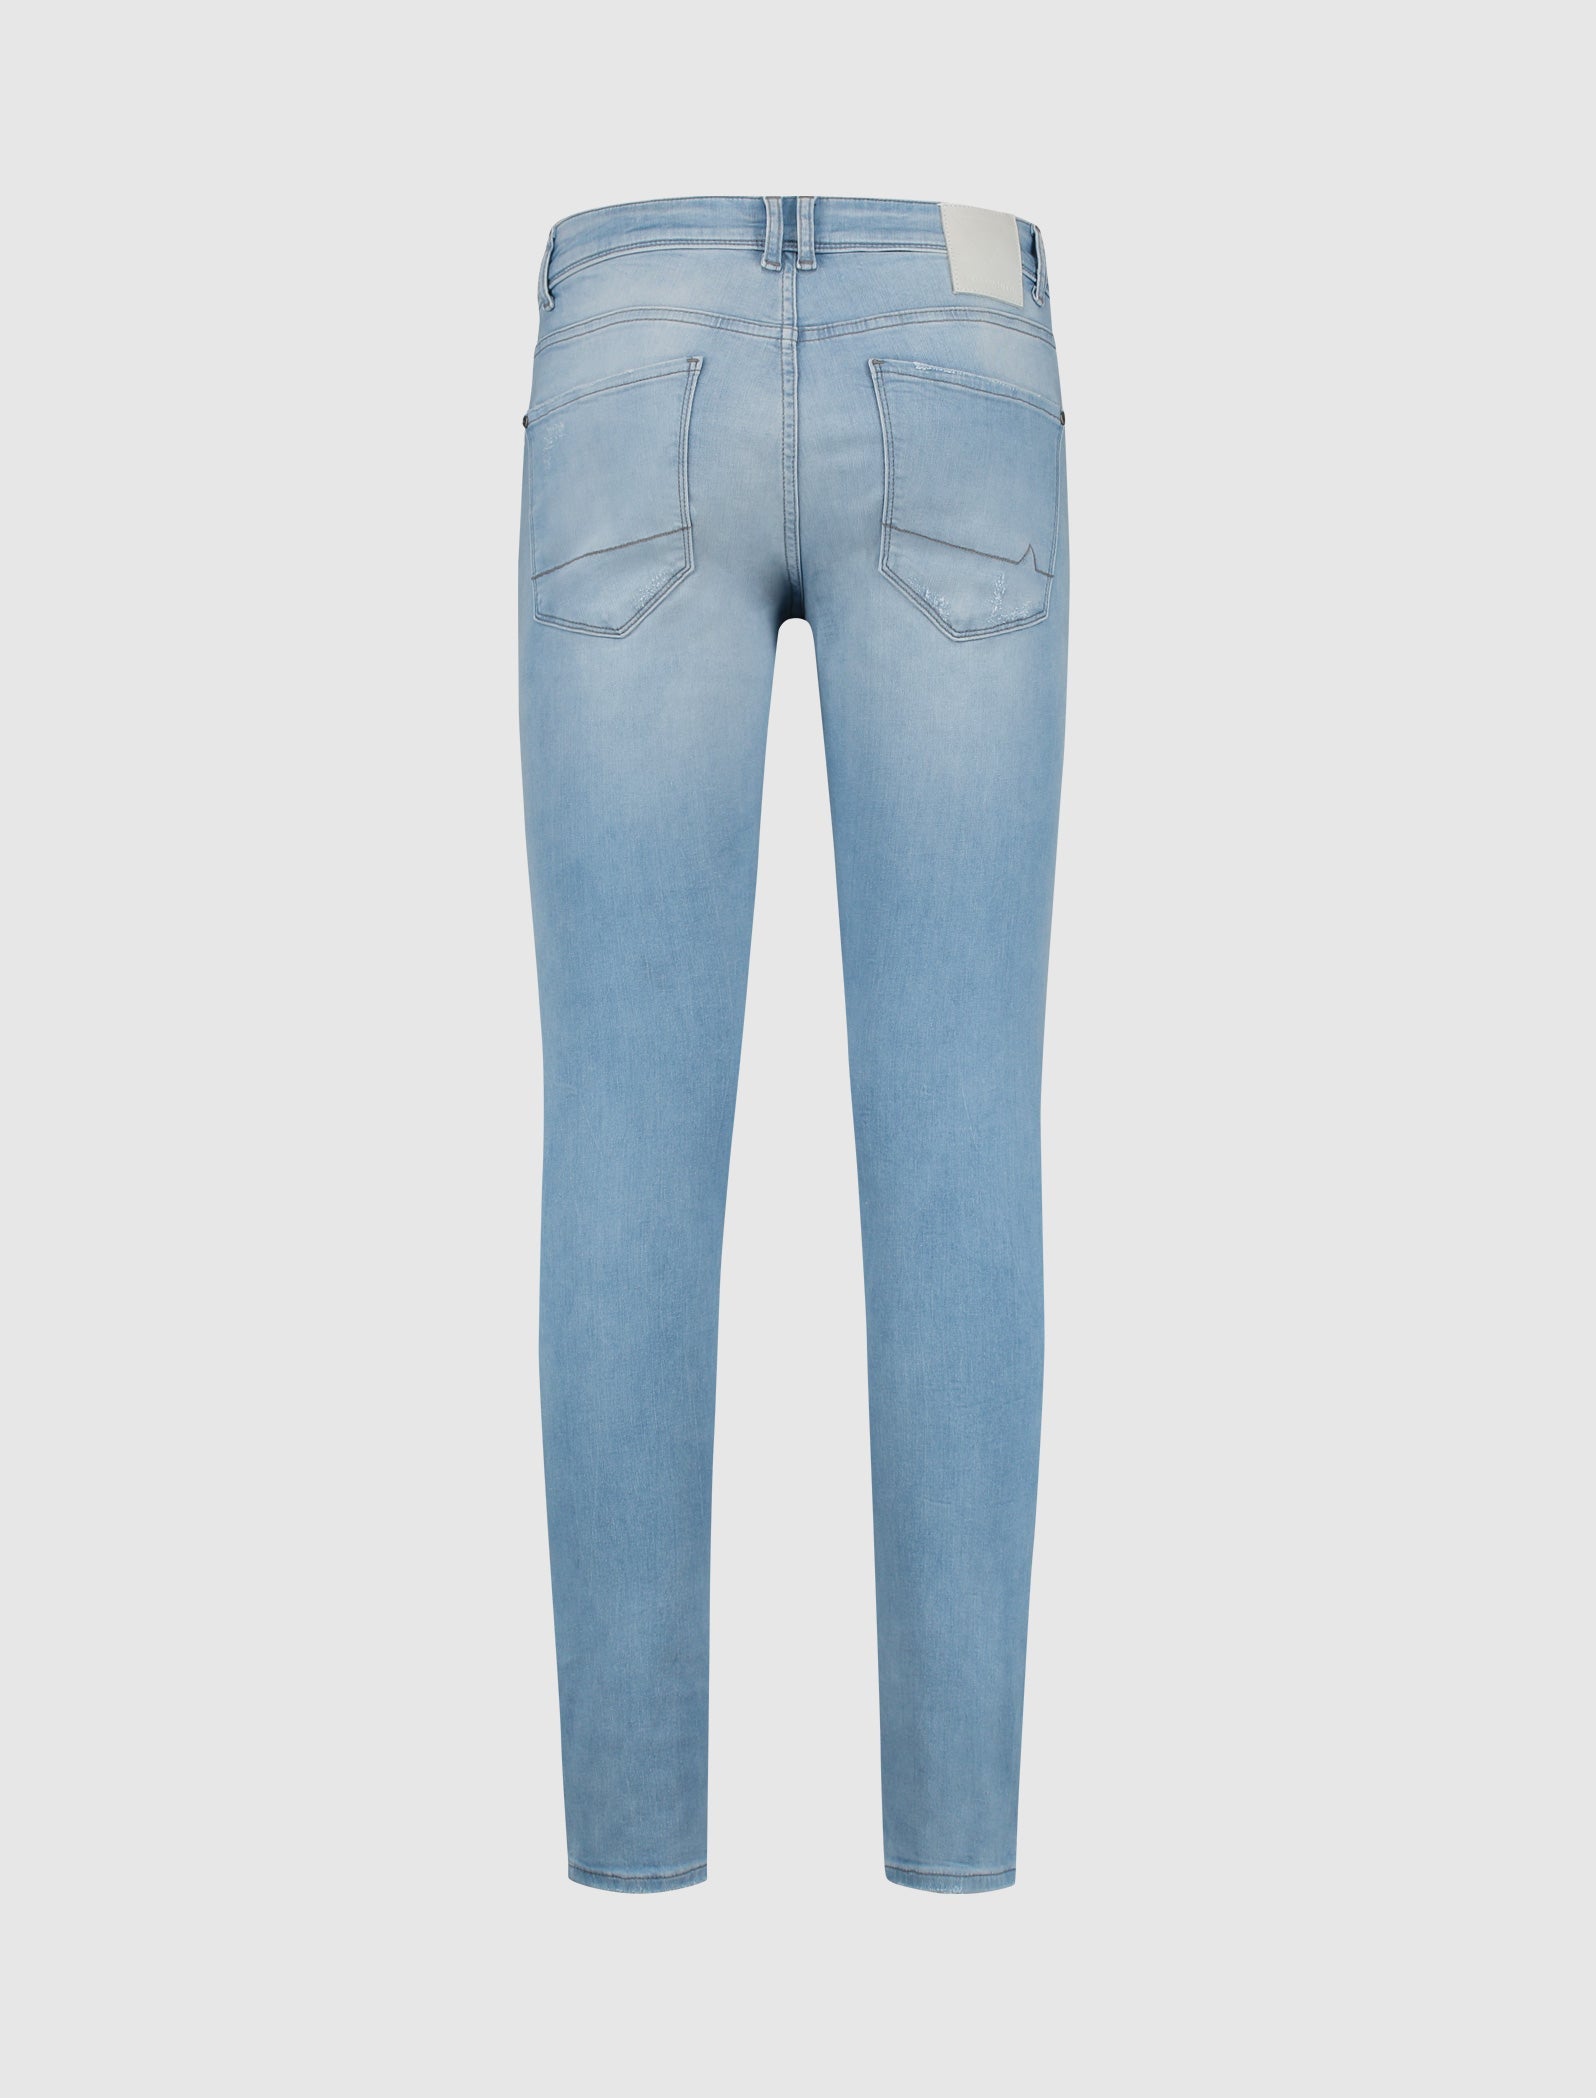 Purewhite Jeans The Dylan W0887